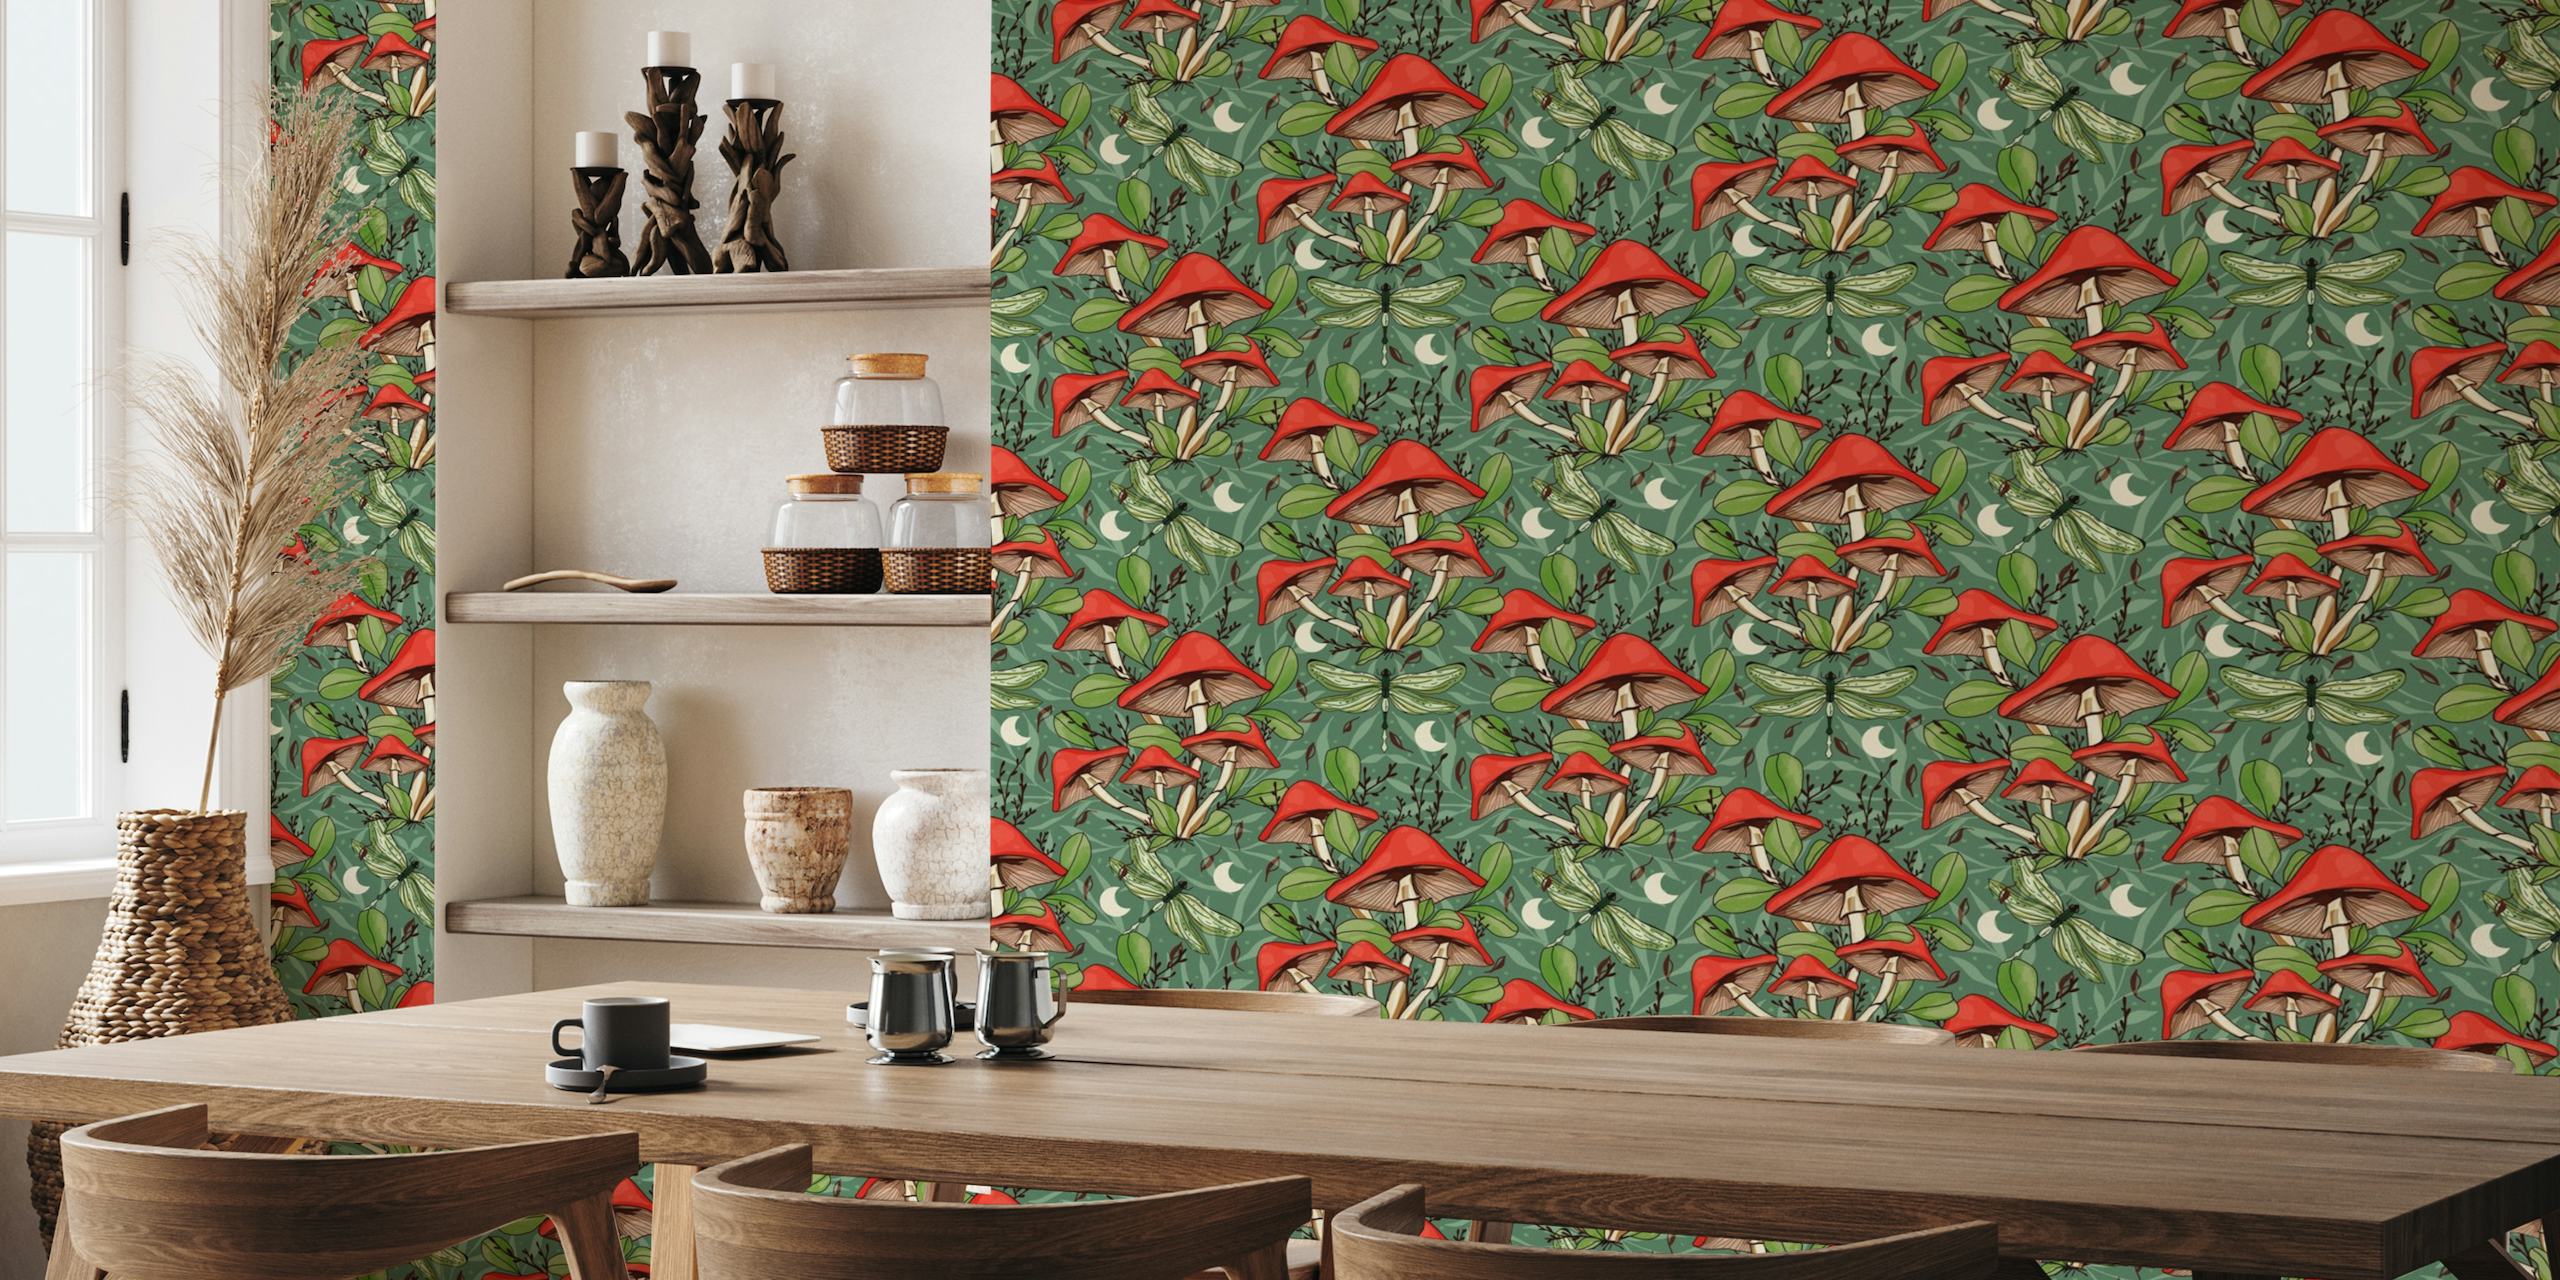 Dragonflies and crescent moon pattern on wallpaper with red toadstools and green leaves